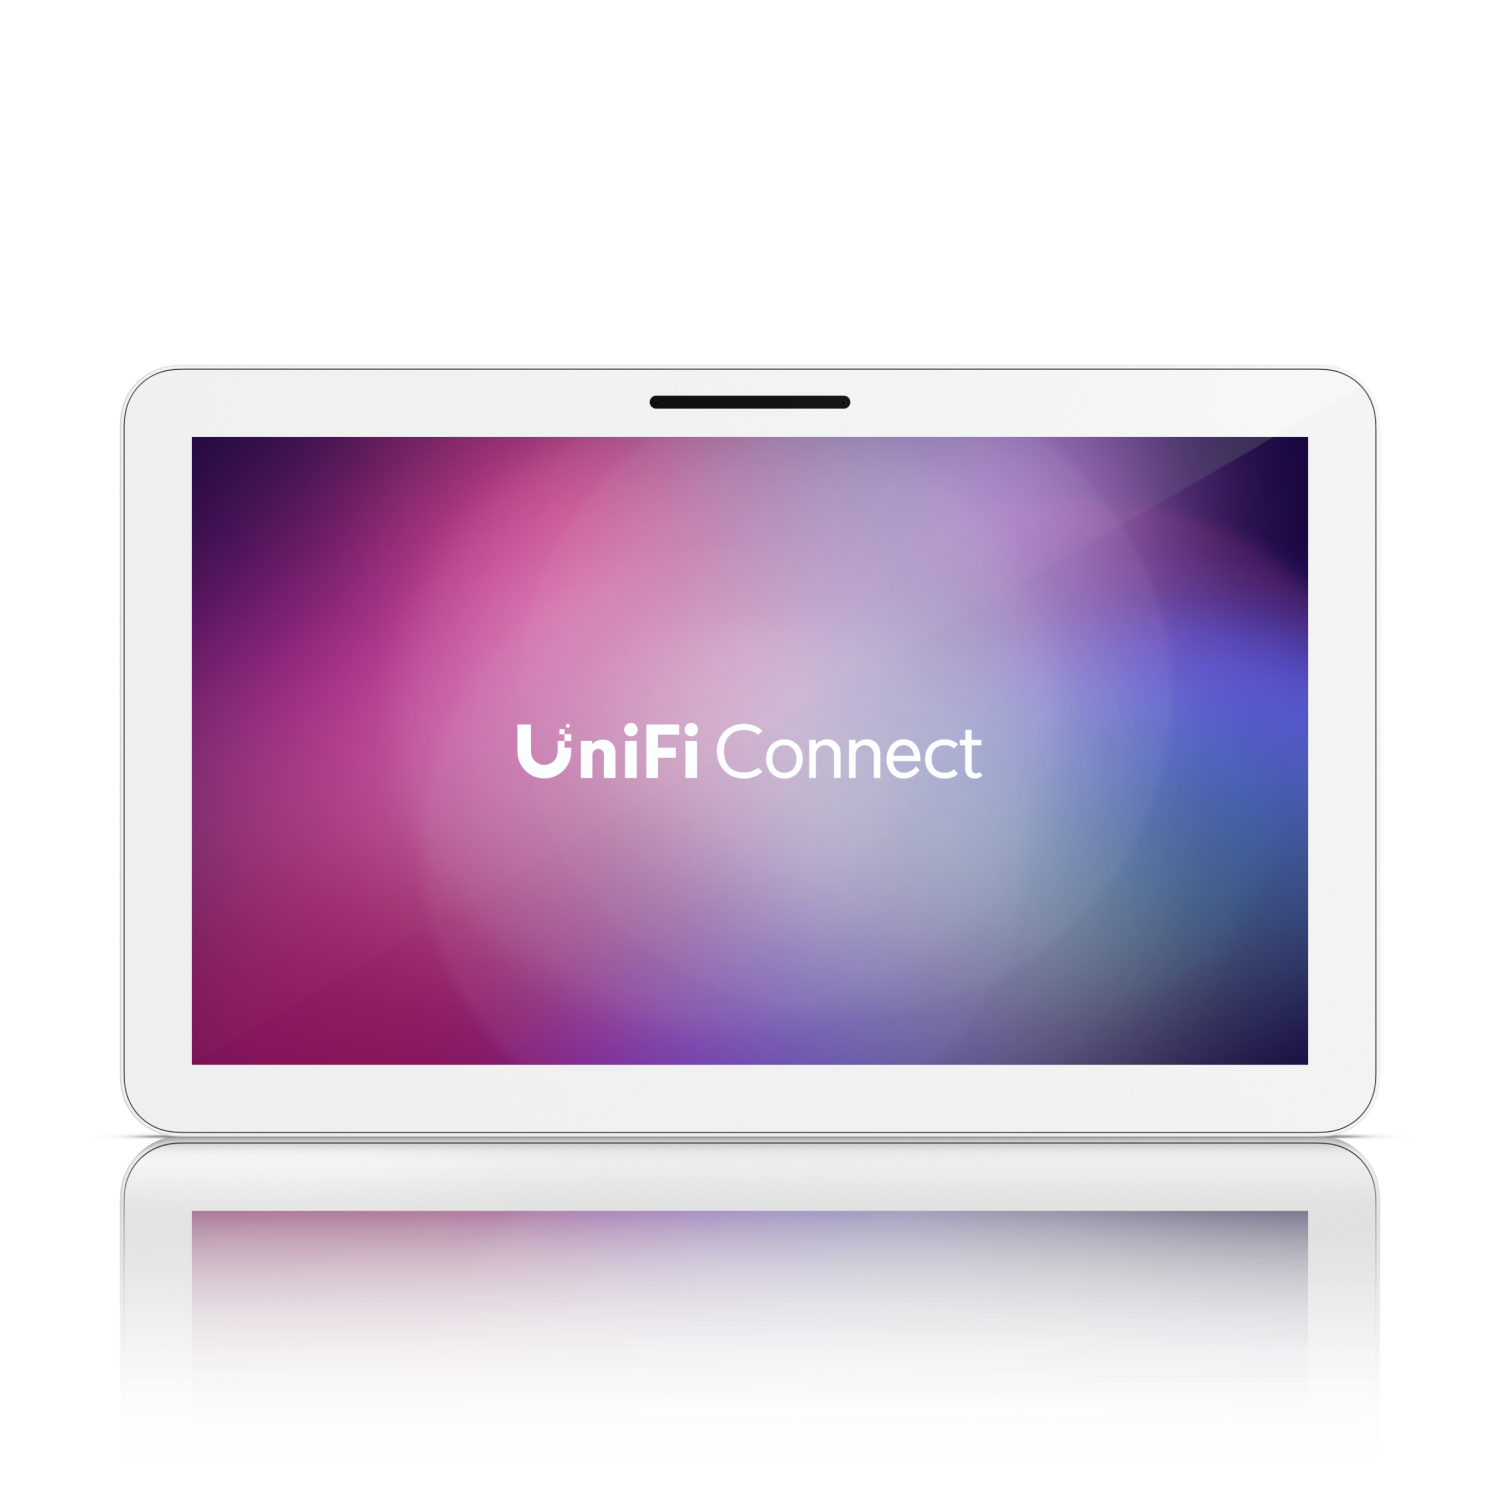 Ubiquiti | Connect Display - Display media, web pages, and